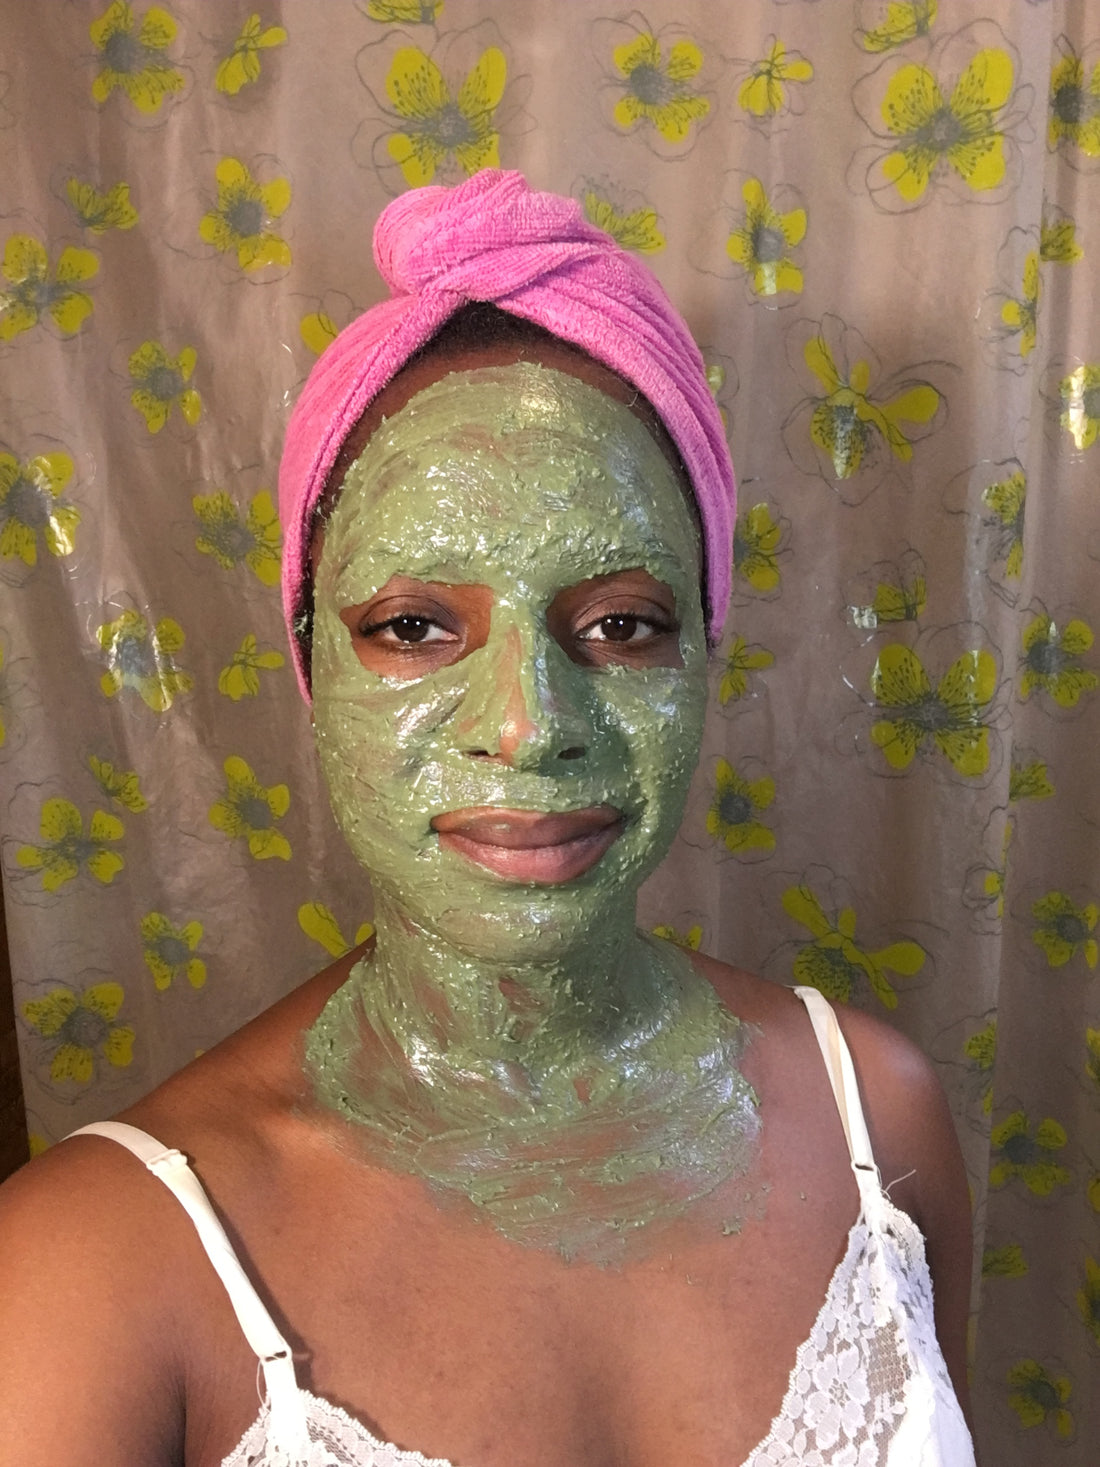 6 Reason Why You Should Never Let Clay Masks Dry on Your Face